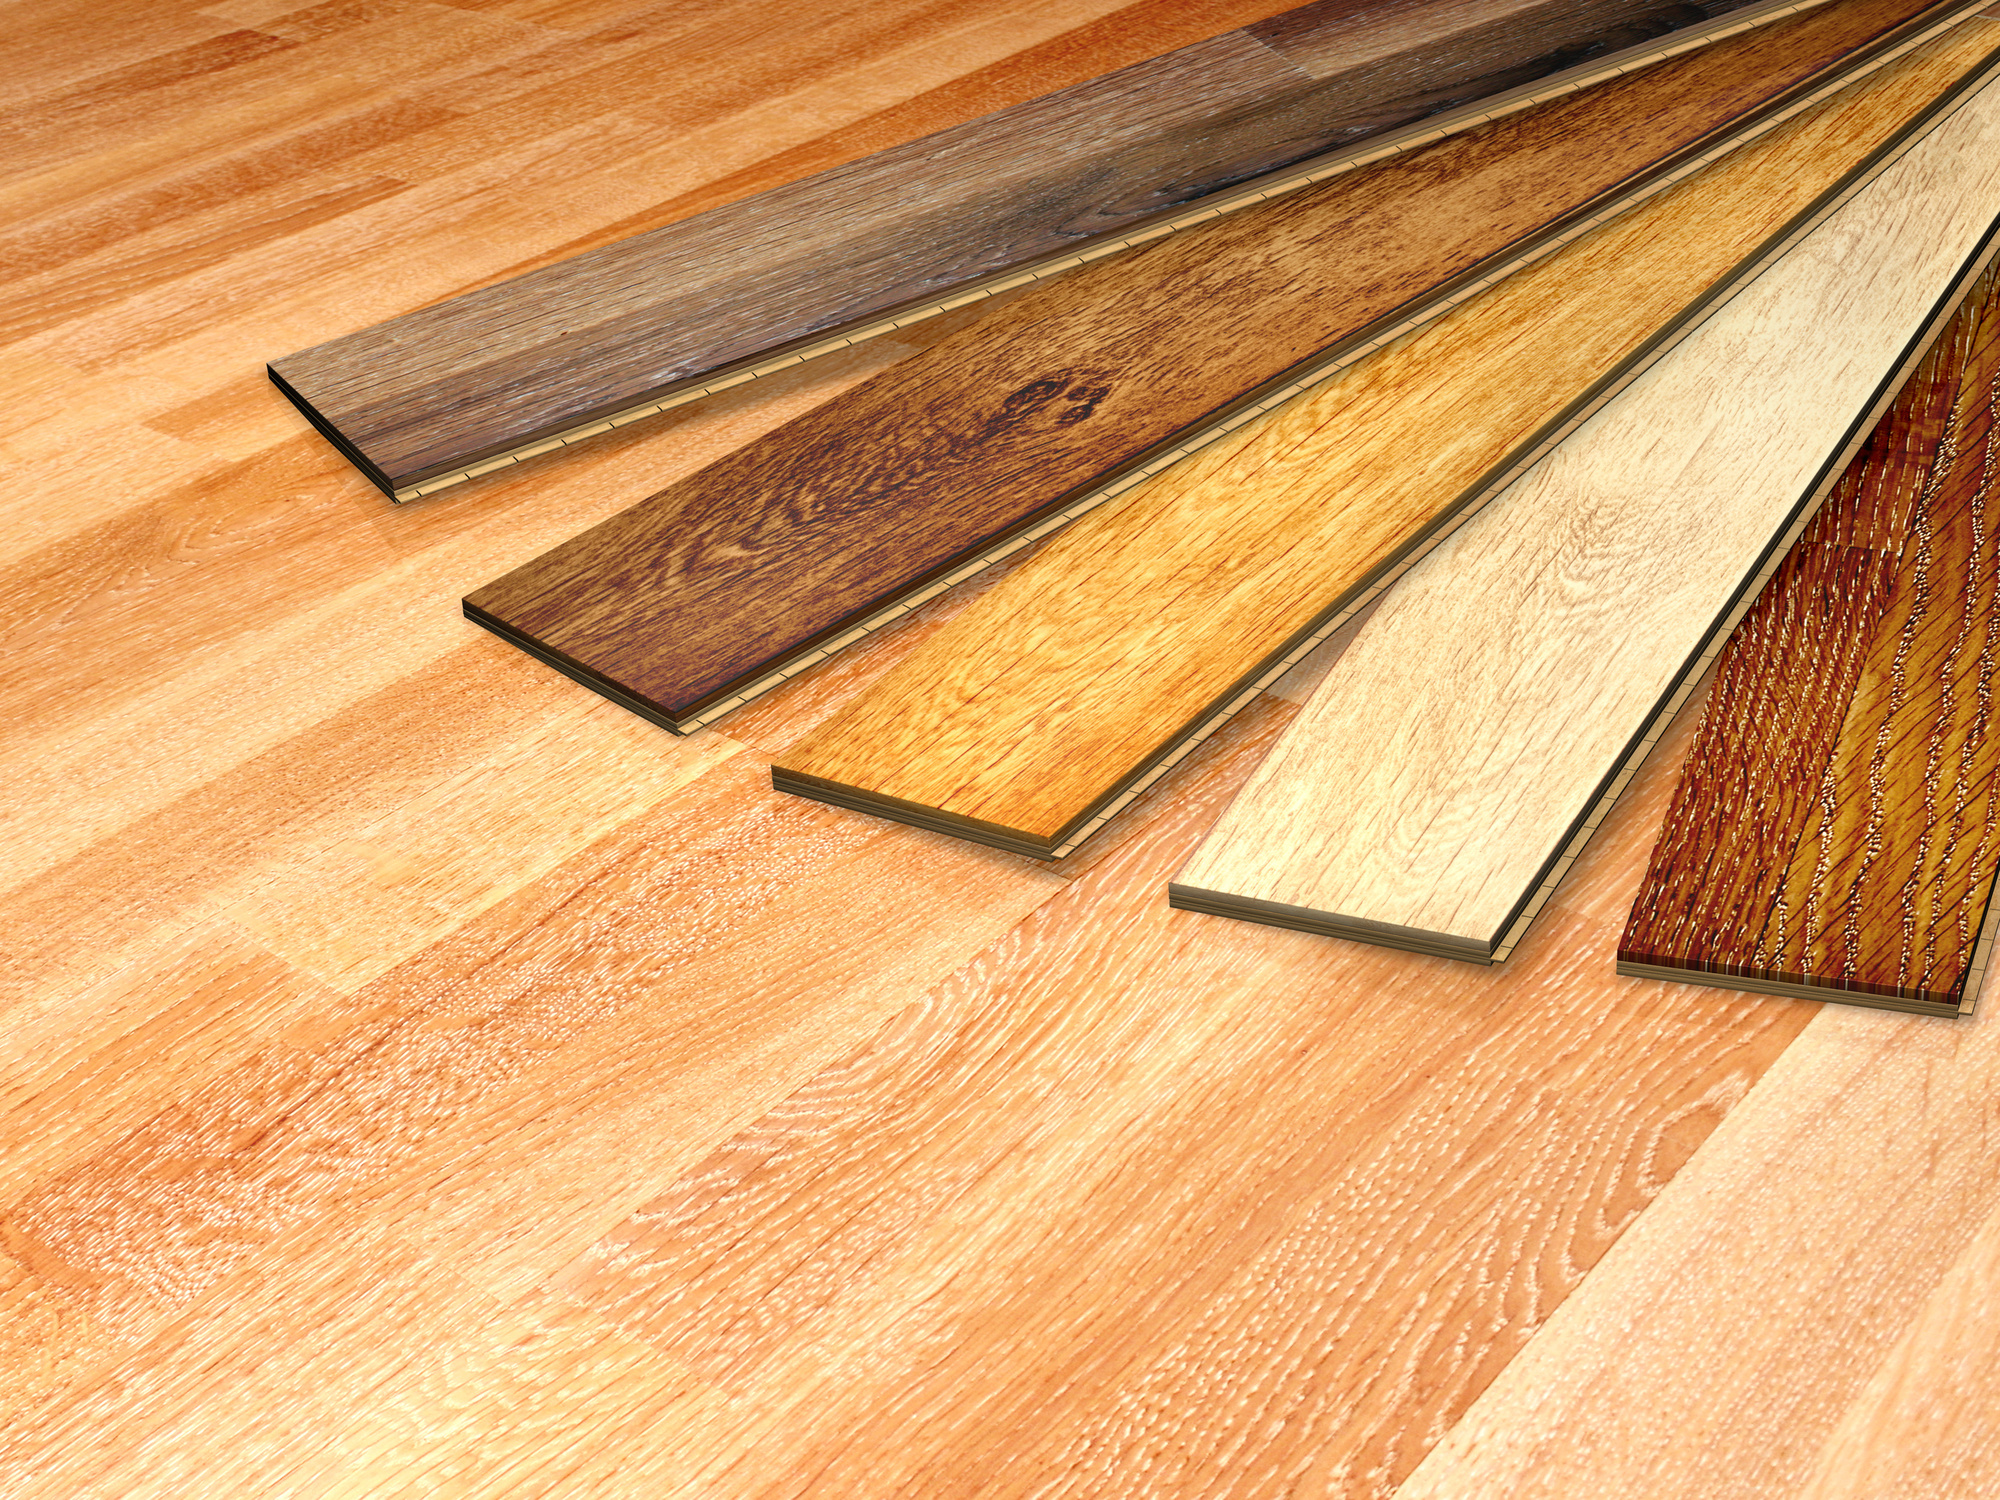 Are you looking for the right type of flooring to finish off your home? Read here for a homeowner's guide to the different types of flooring to find your match.